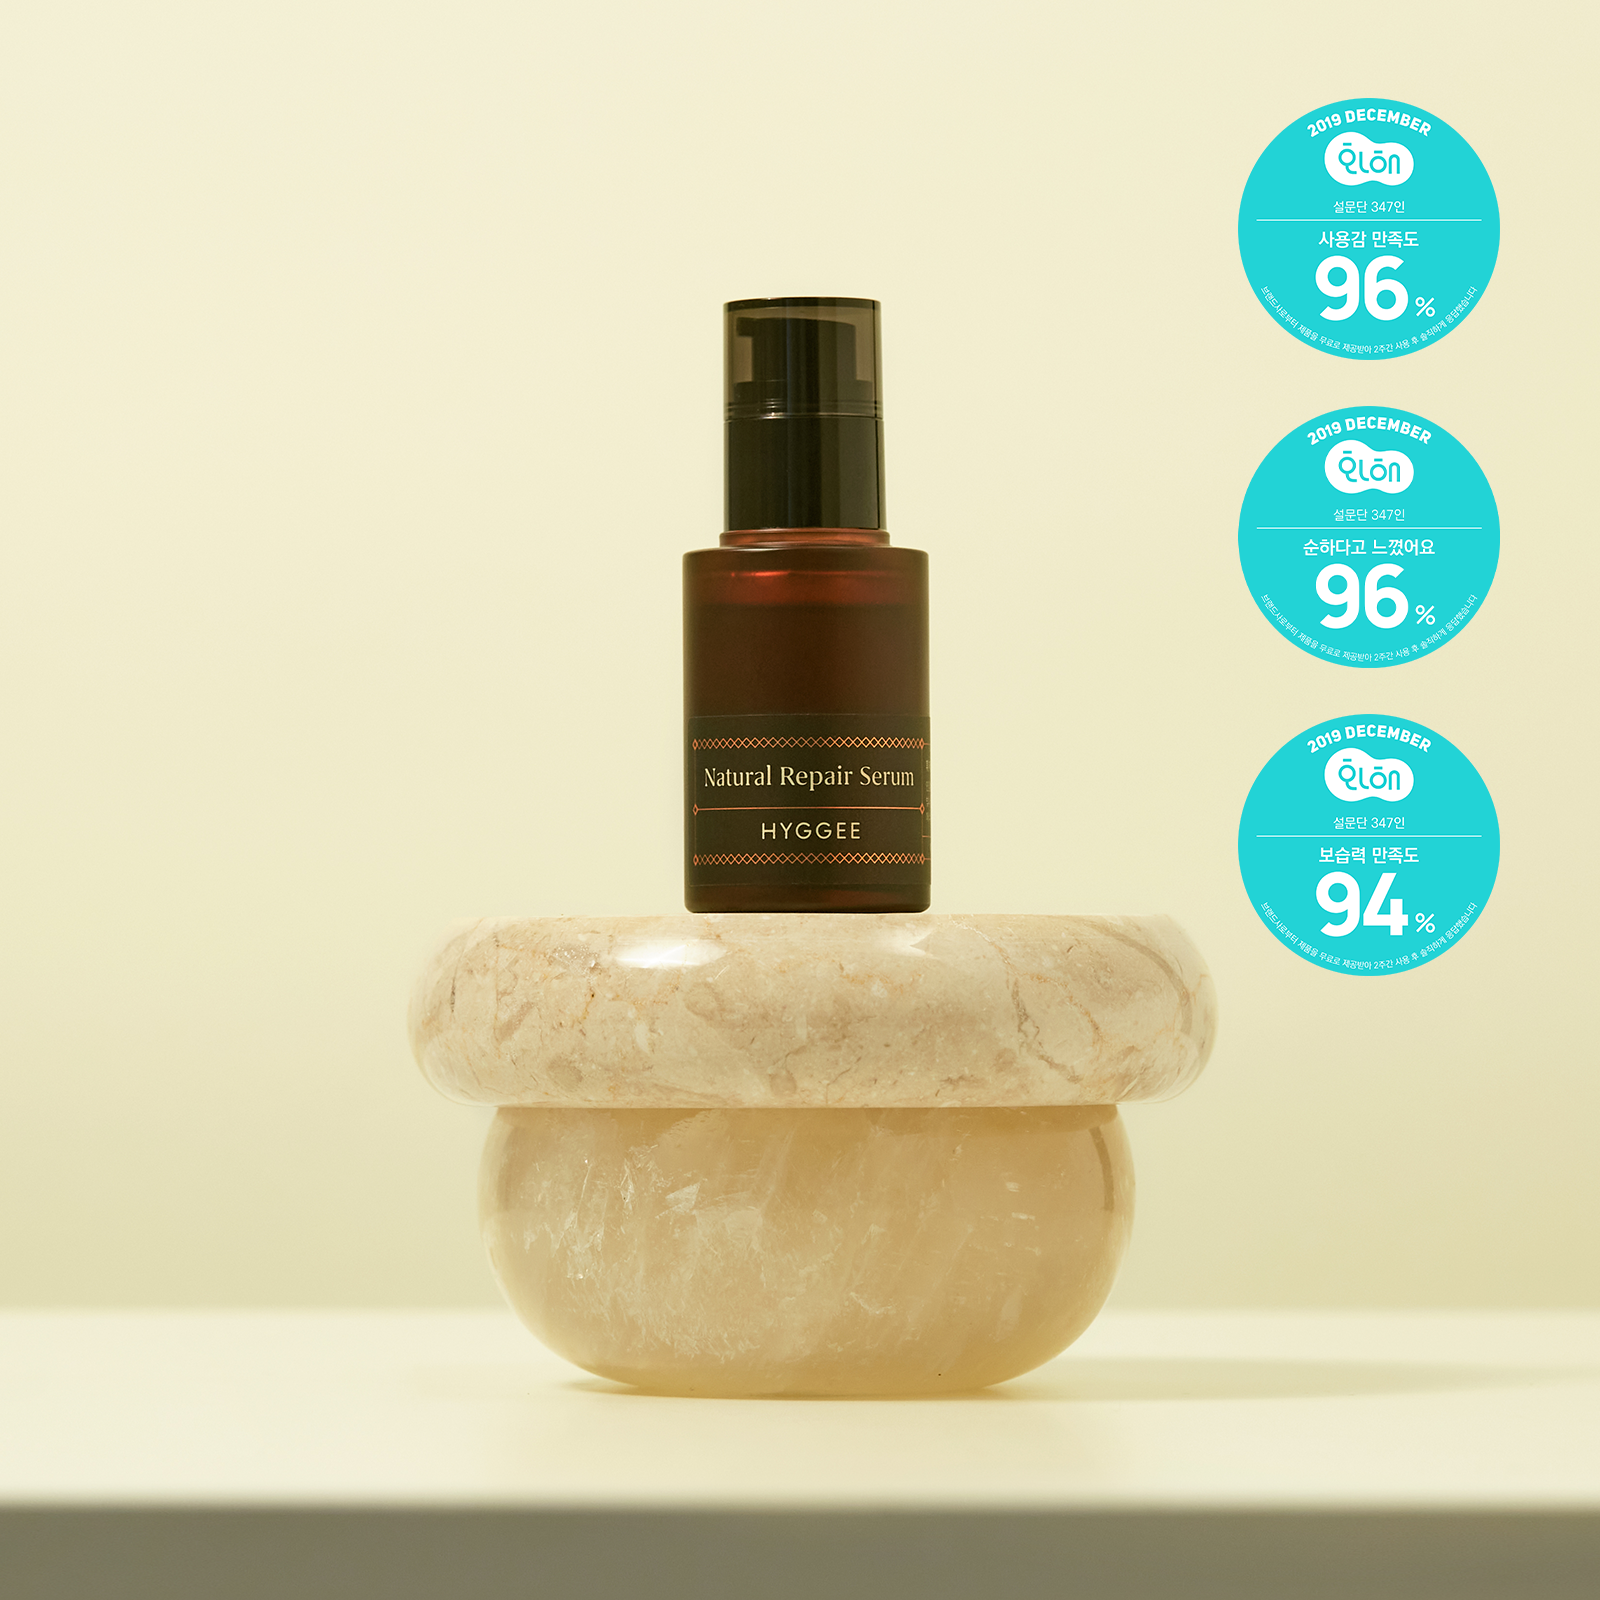 HYGGEE Natural Repair Serum 30ml on sales on our Website !